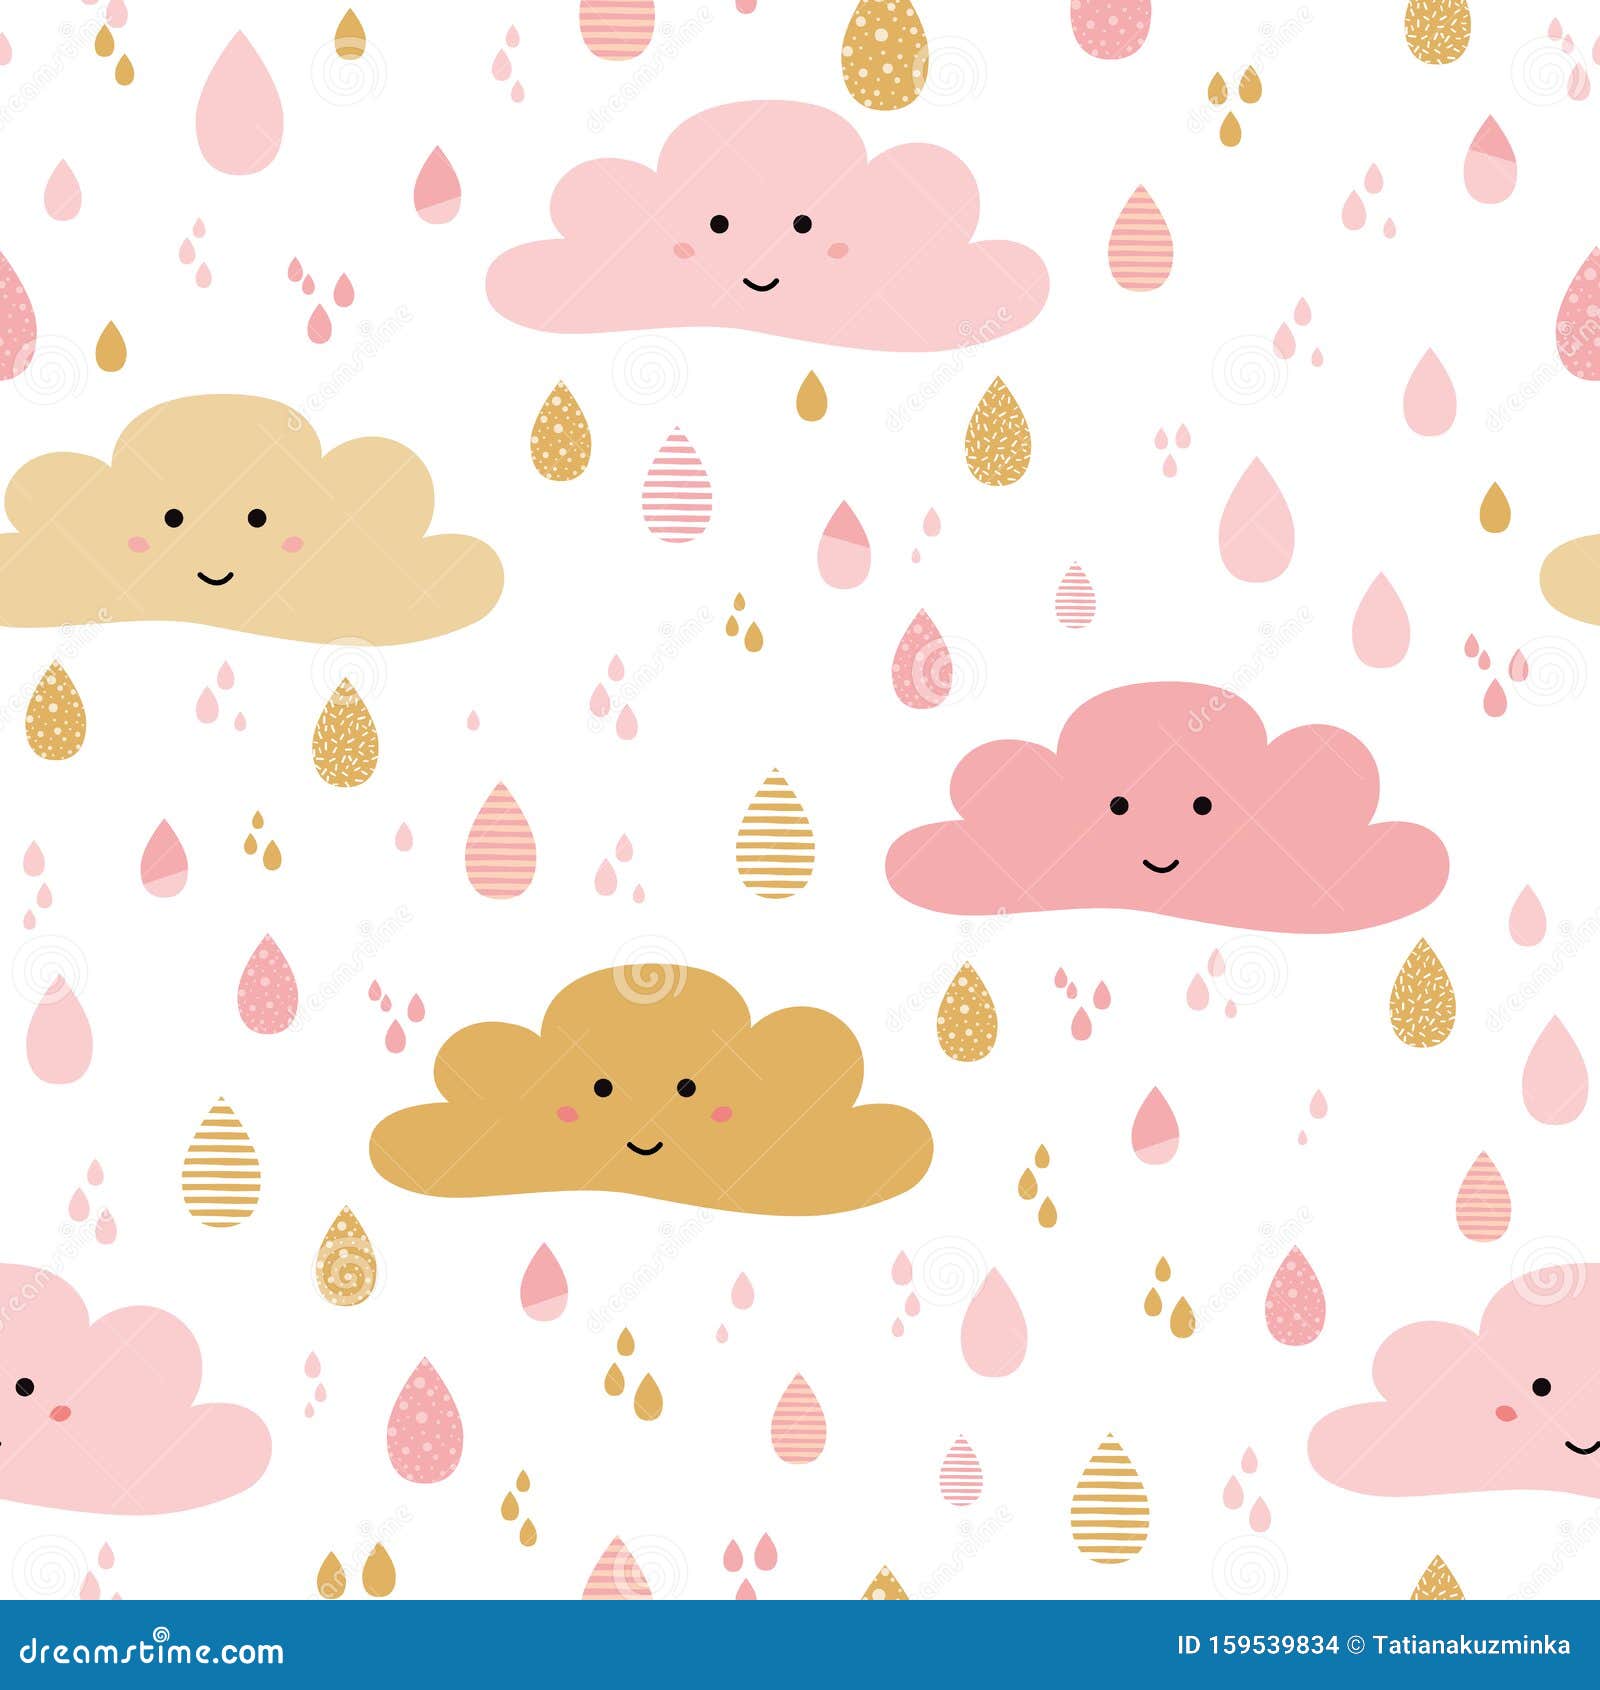 Cute Pink Seamless Pattern Background Smile Clouds Rainy Drops Little Girls  Baby Wallpaper Stock Illustration - Illustration of love, doodle: 159539834